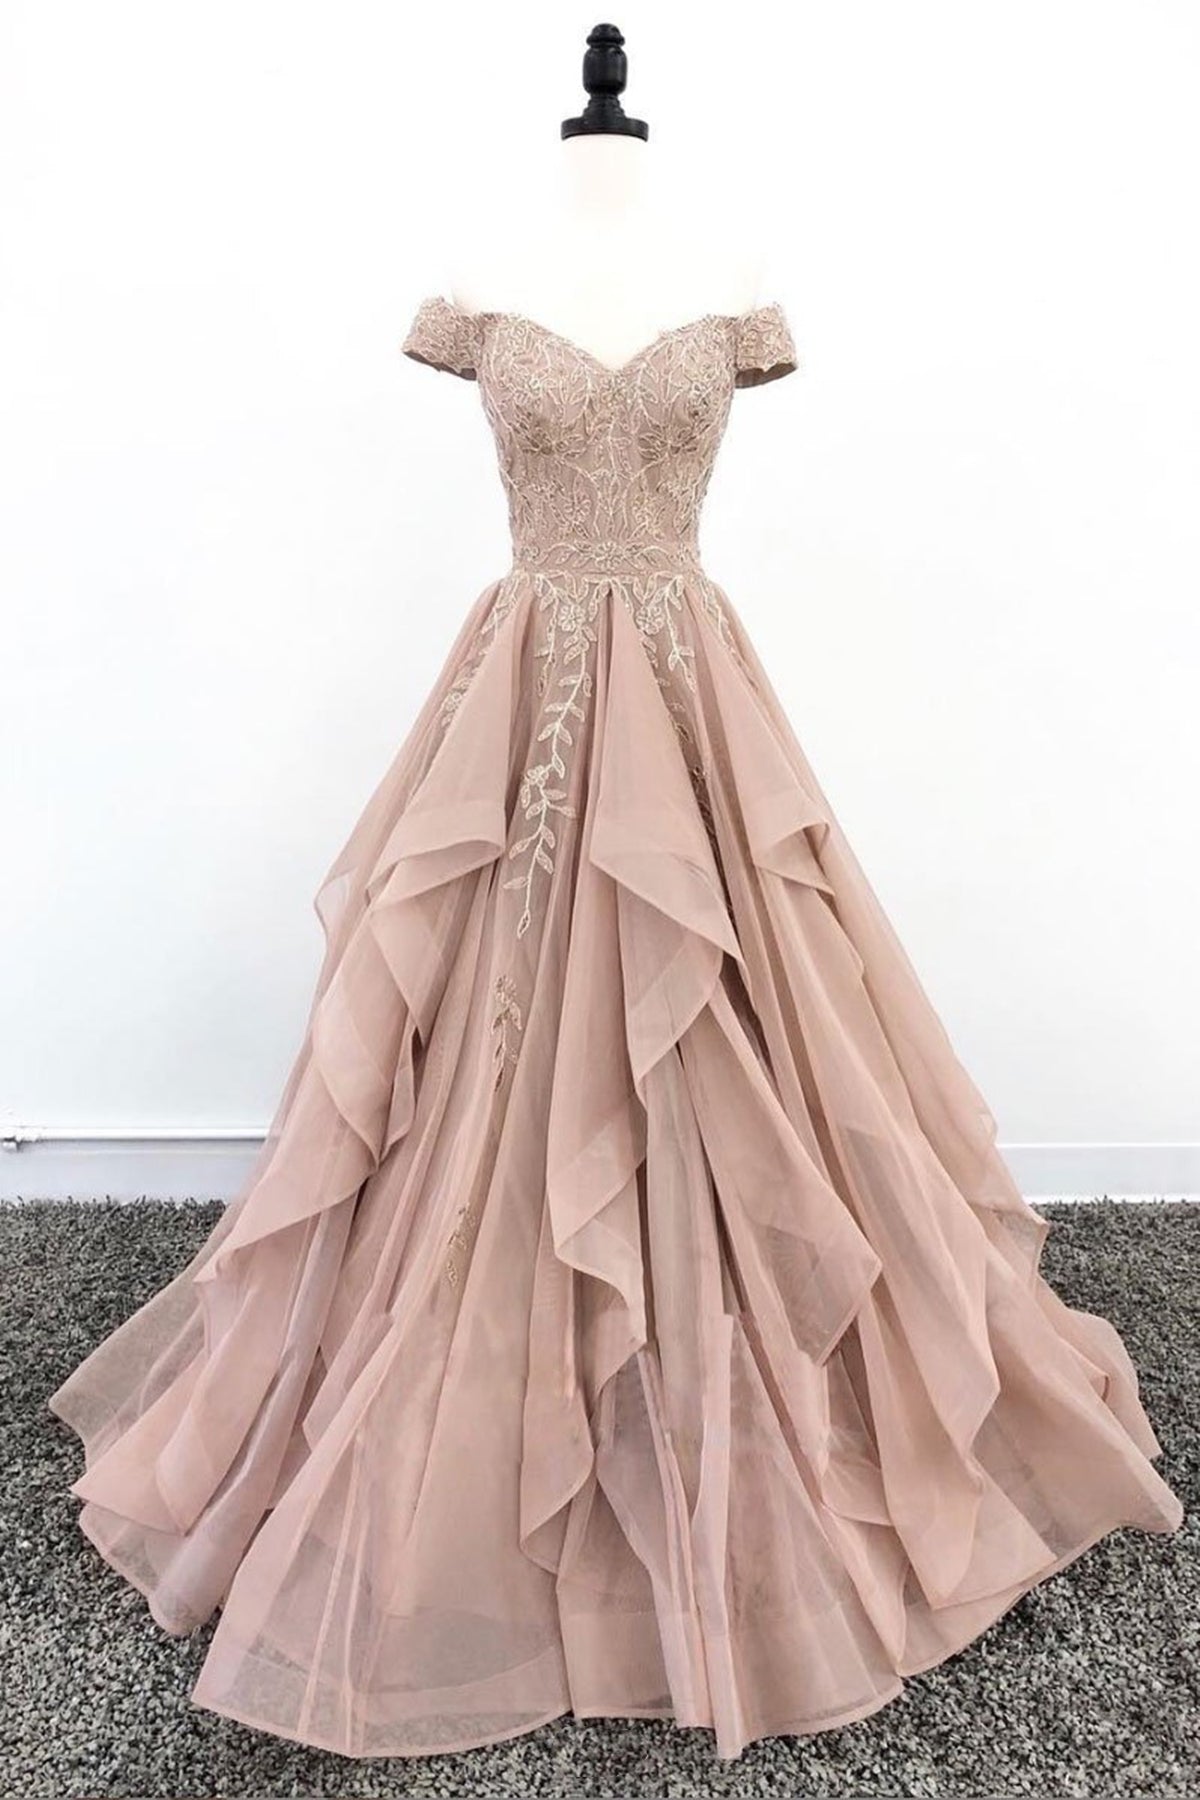 Off the Shoulder Champagne Lace Prom Dresses, Off Shoulder Champagne Lace Formal Evening Dresses